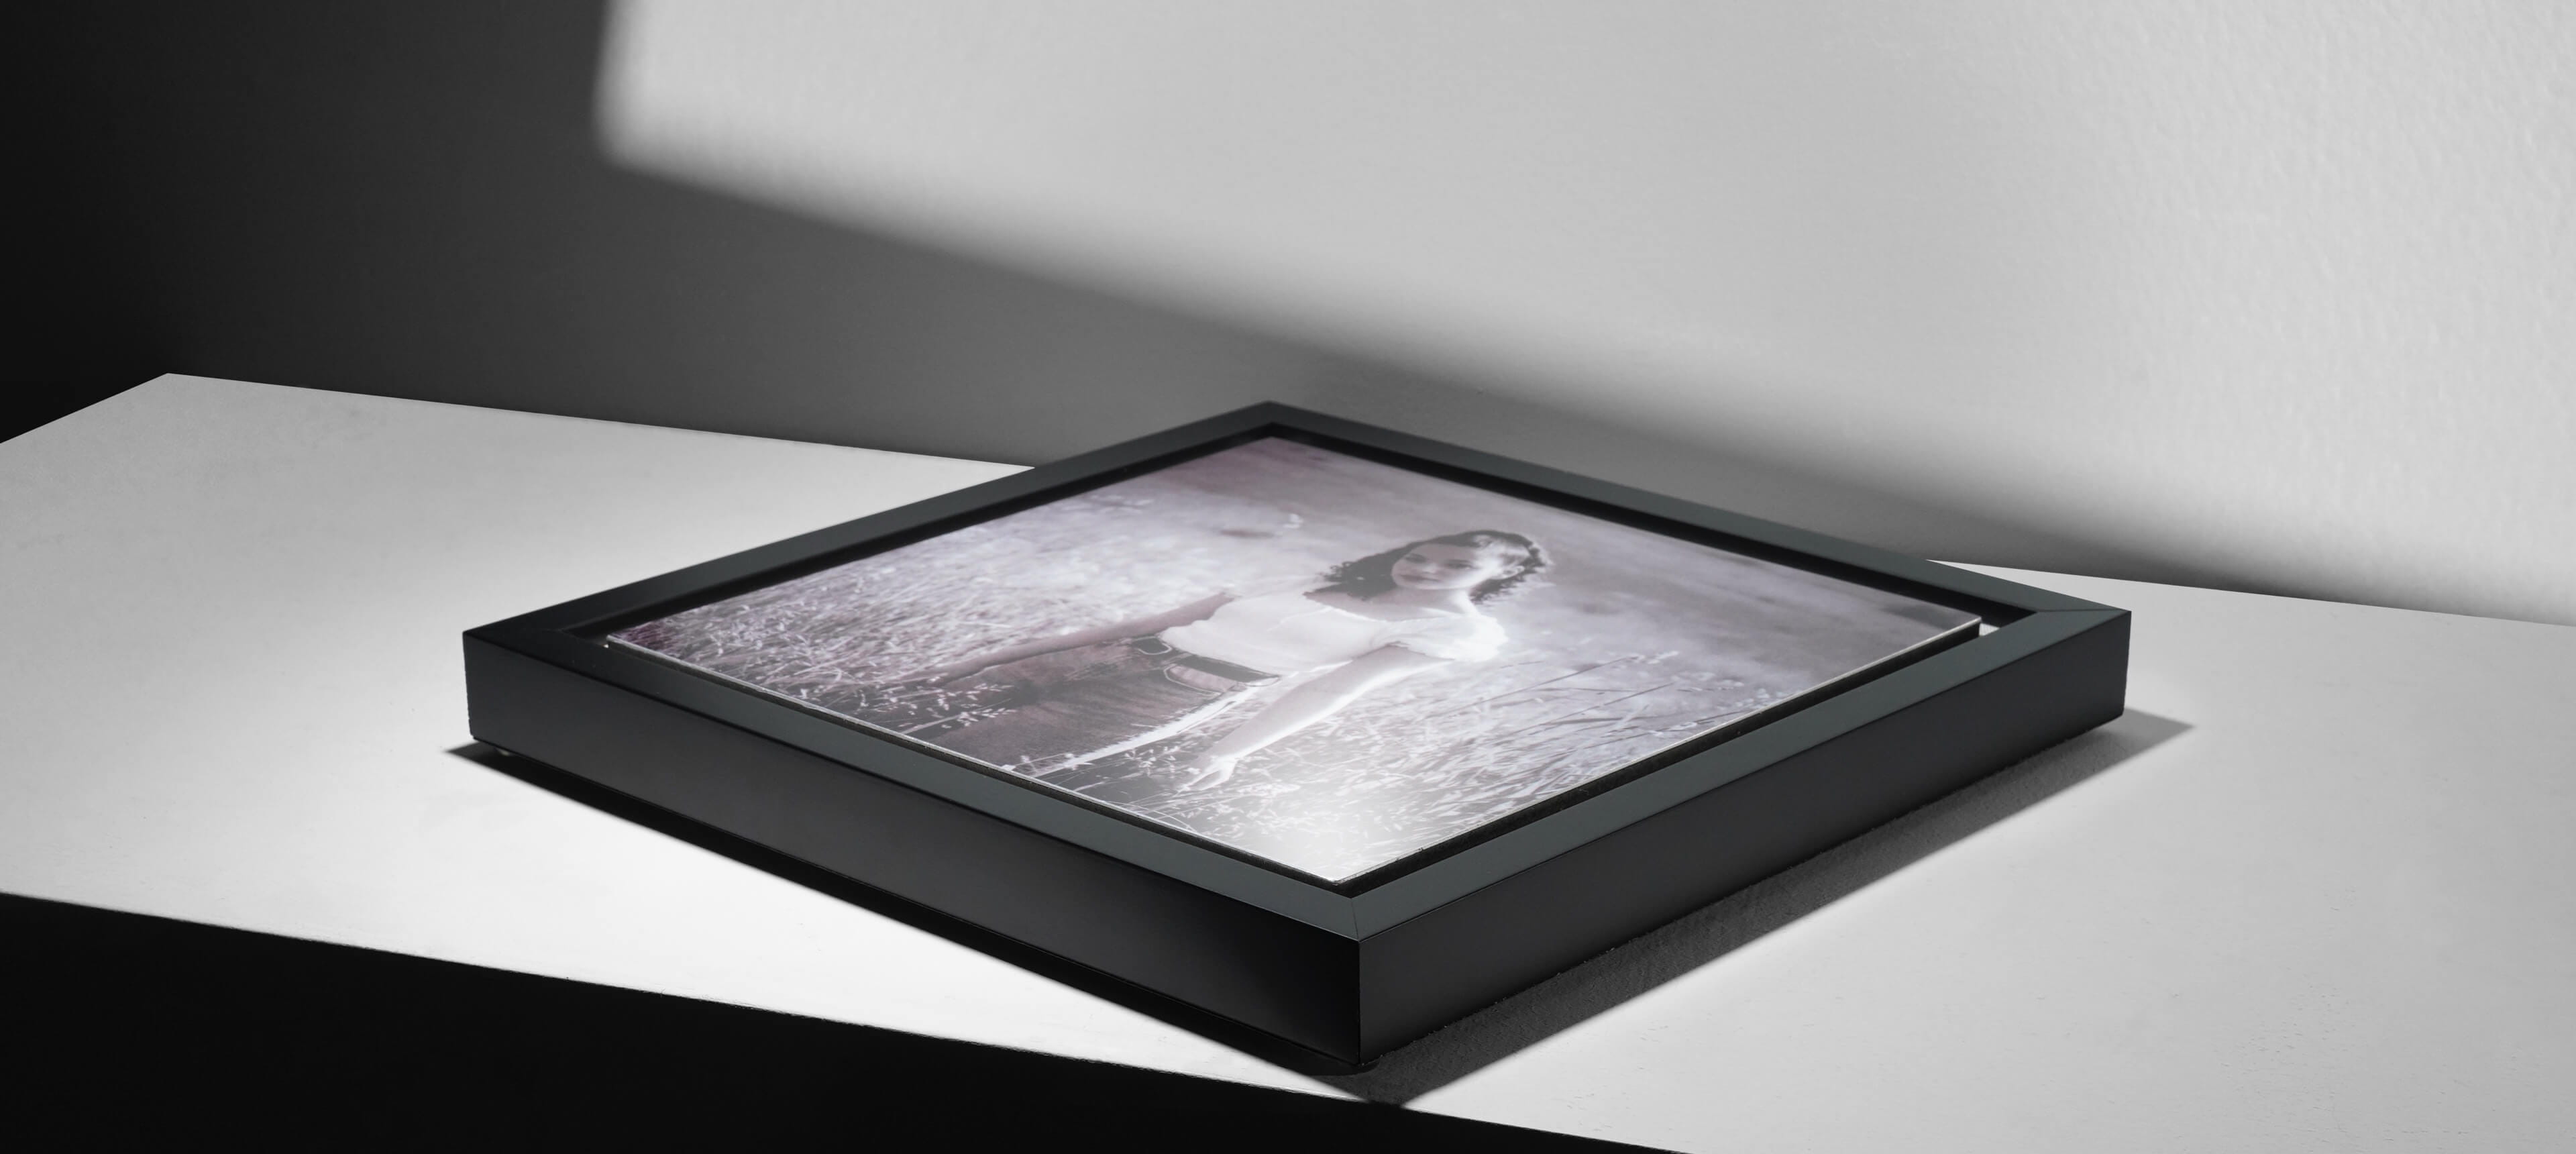 framed metal print on grey table showing woman in field